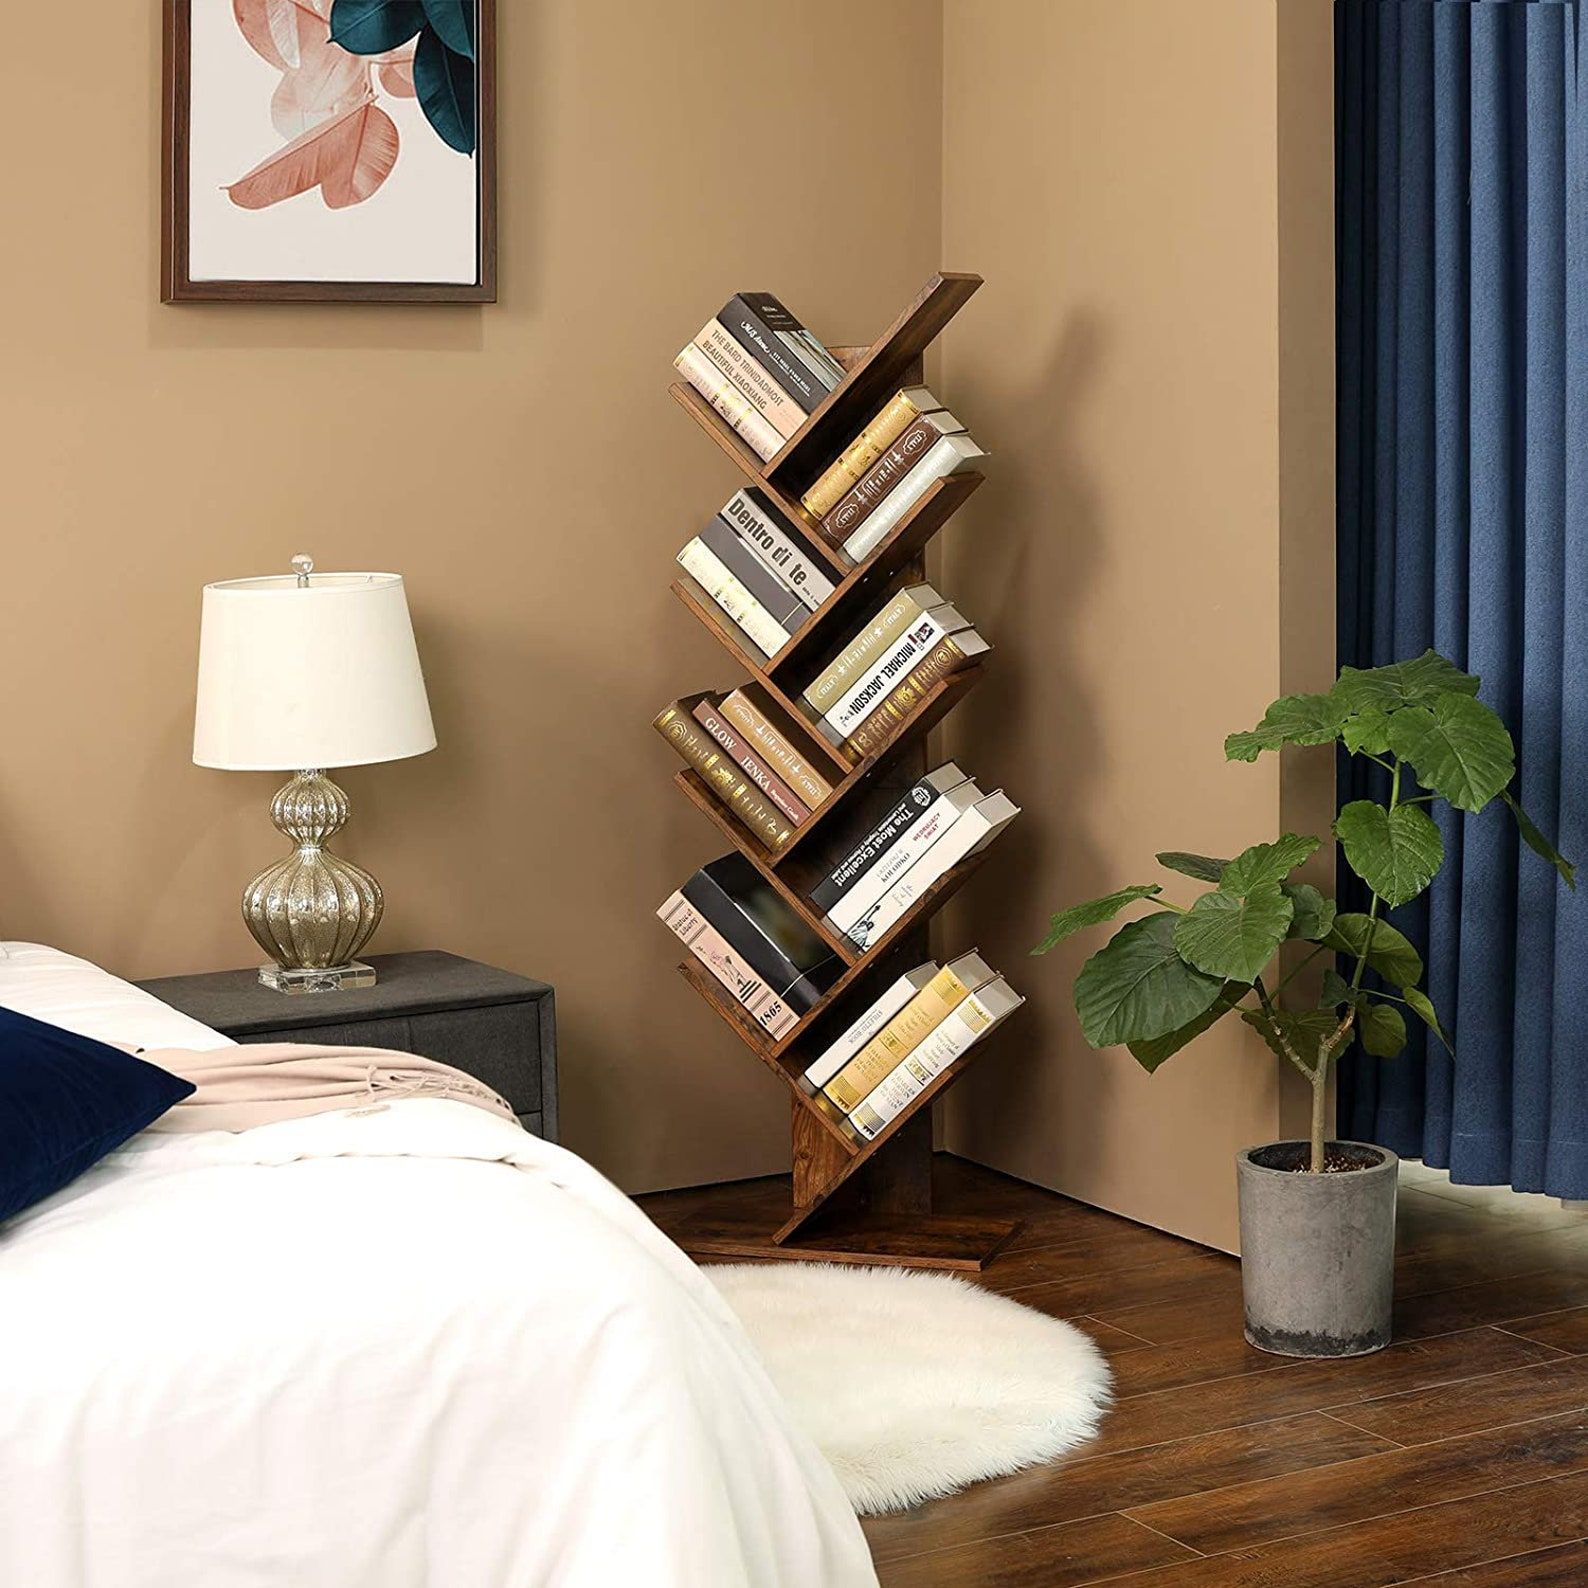 floor standing tree-shaped bookshelf with books on every shelf in the corner of a bedroom